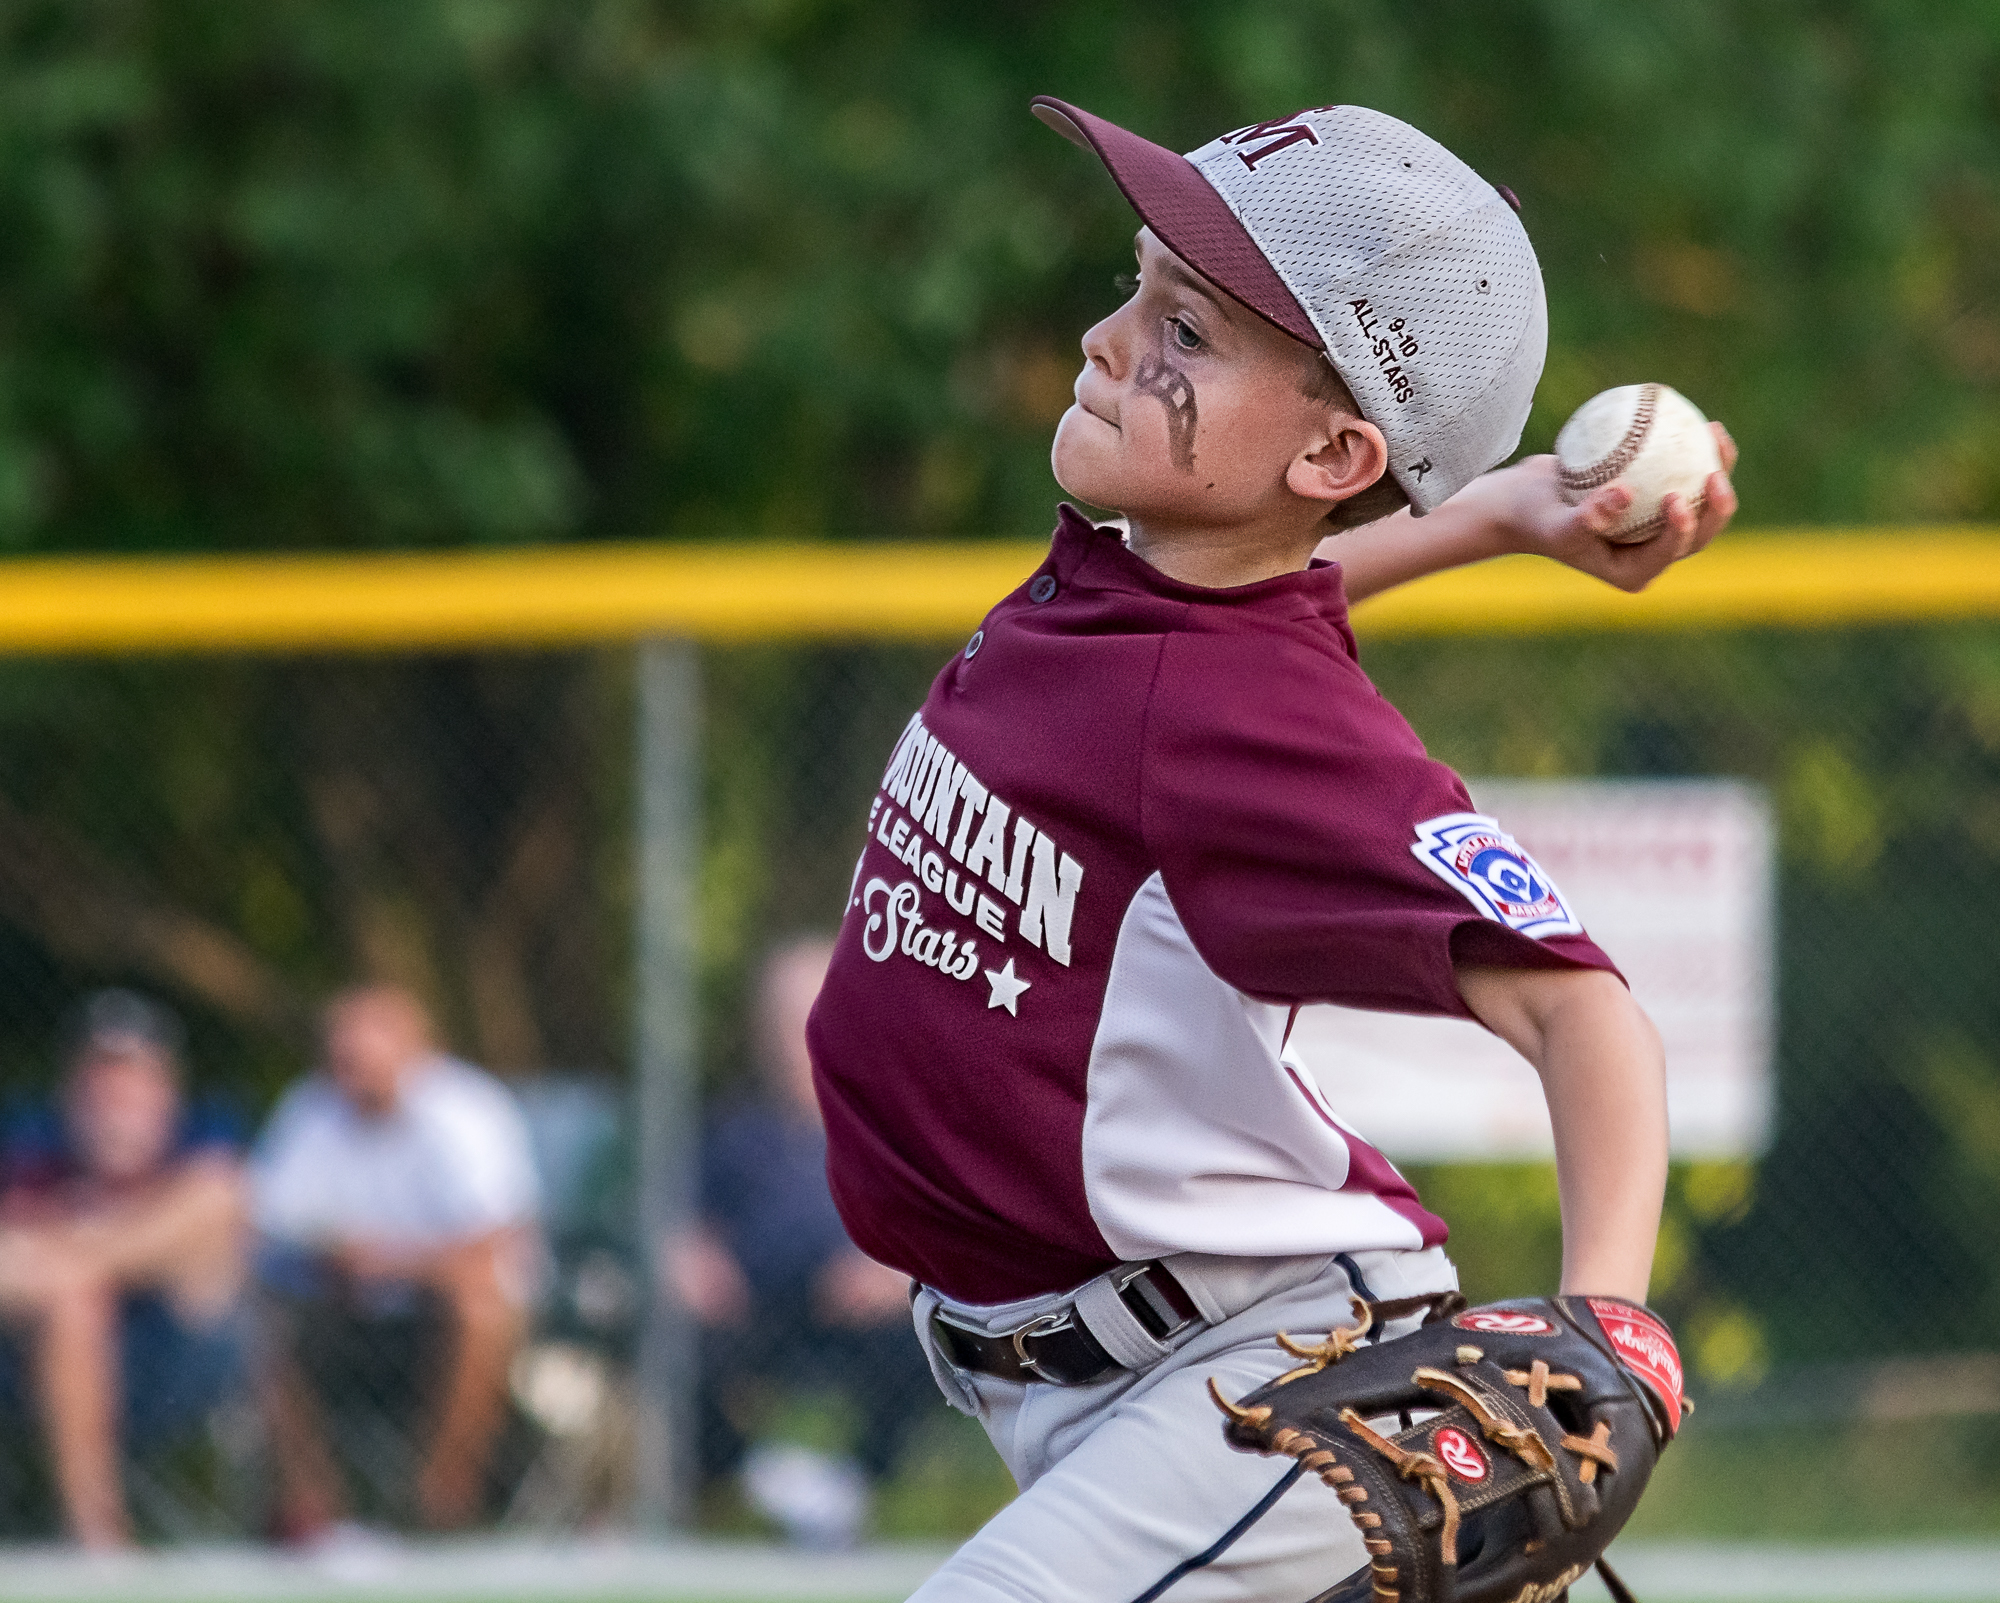 A Little League pitcher delivers during a game